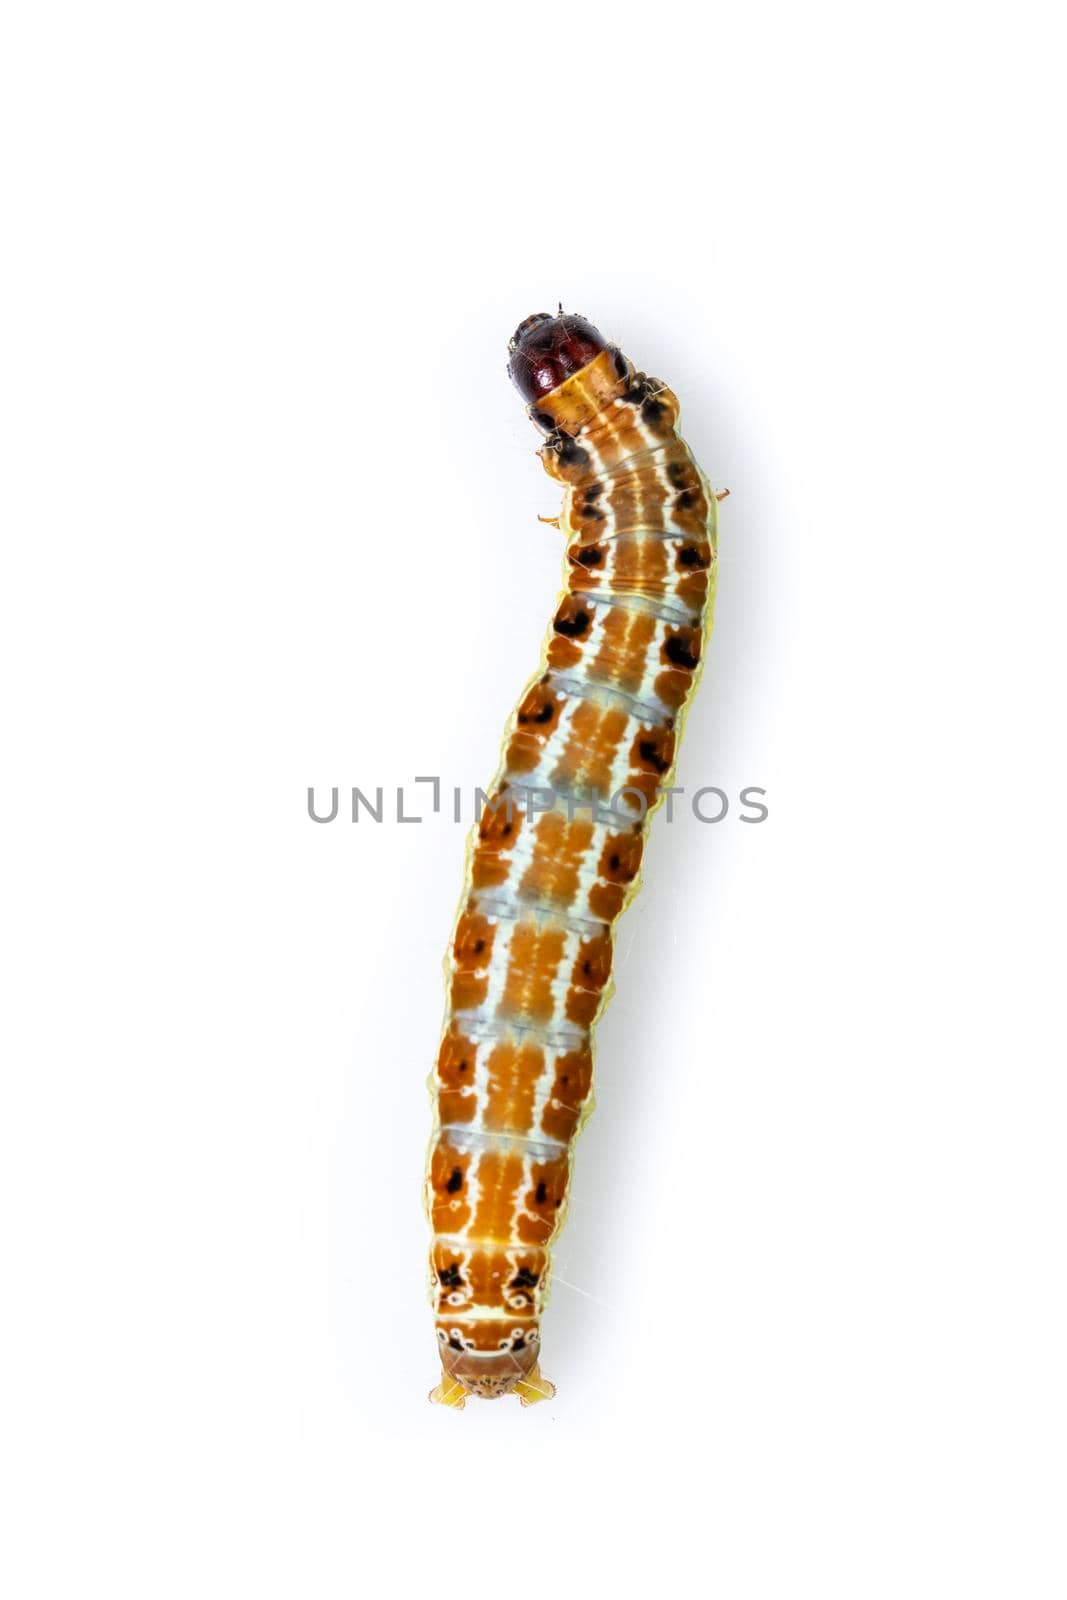 Image of brown pattern caterpillars isolated on white background. Animal. Insect.